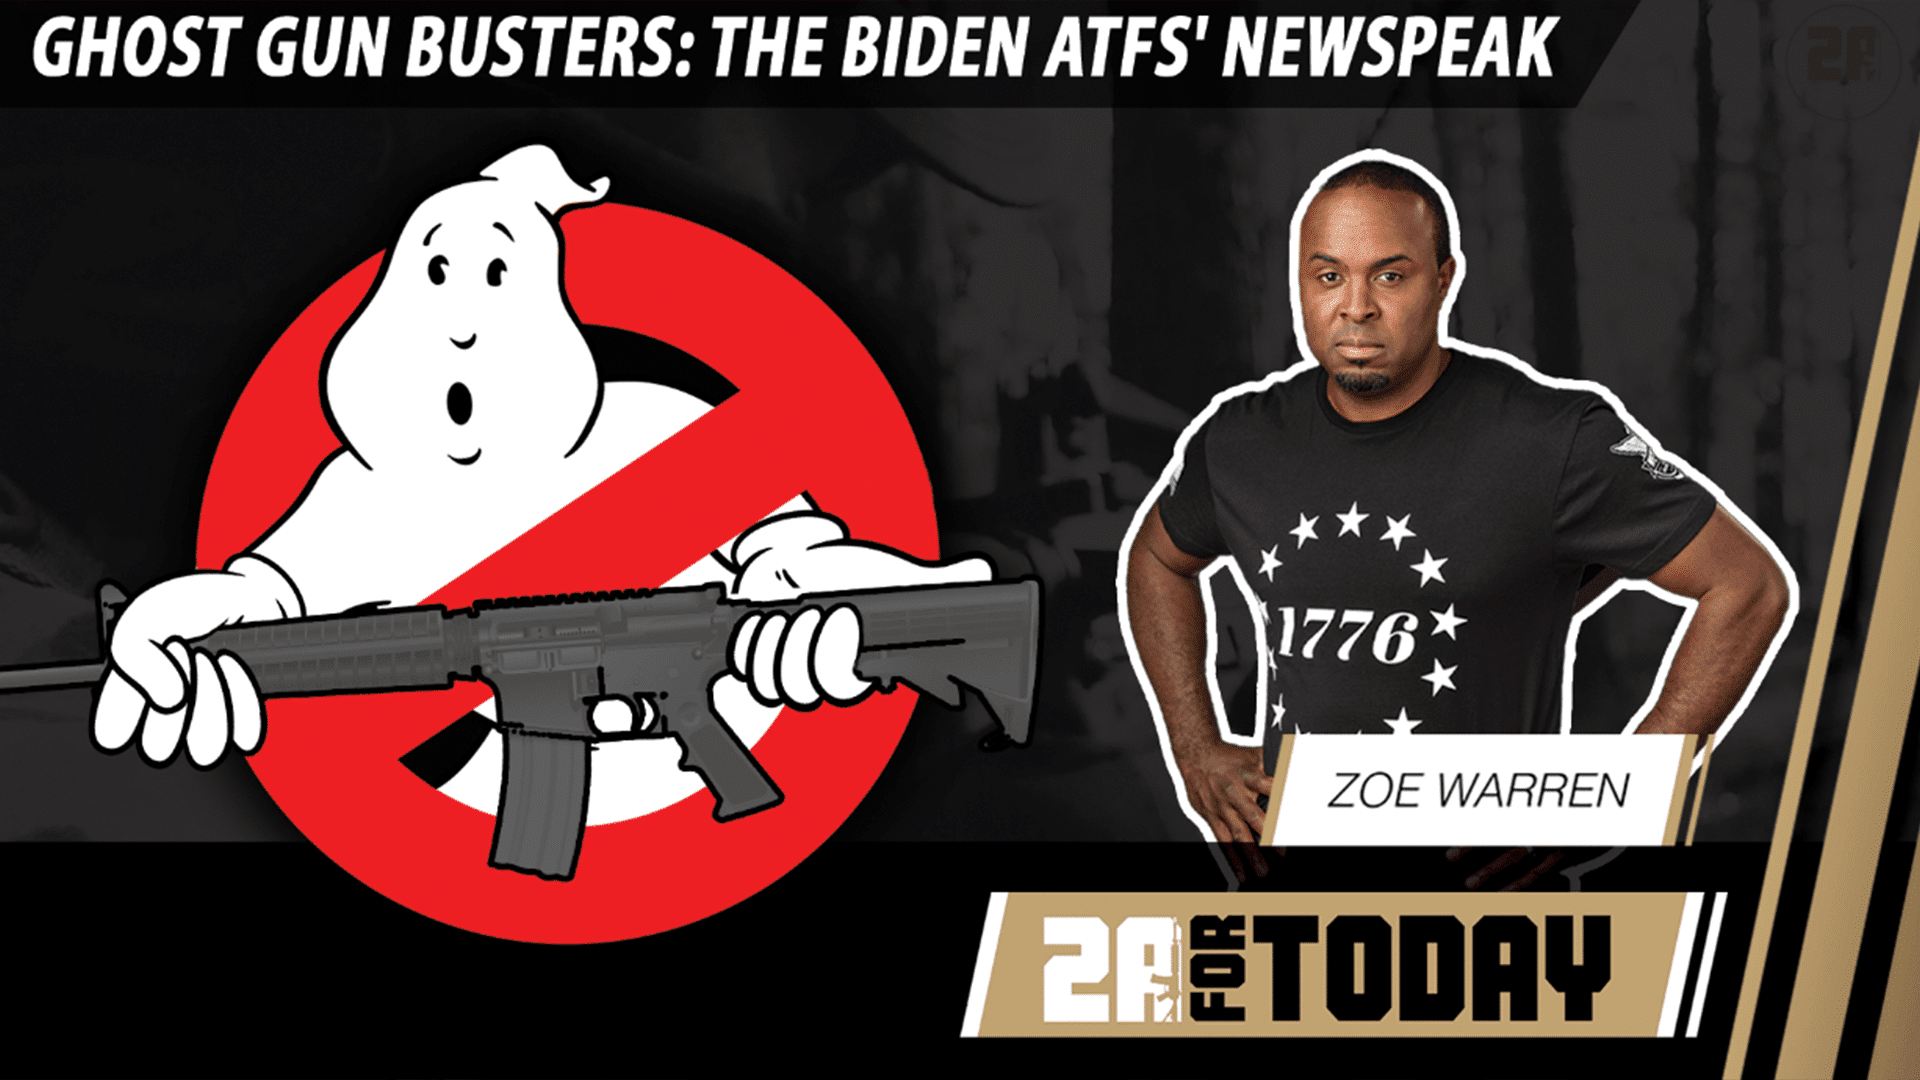 Ghost Gun Busters: The Biden ATFs' Newspeak - 2A For Today! - The New American